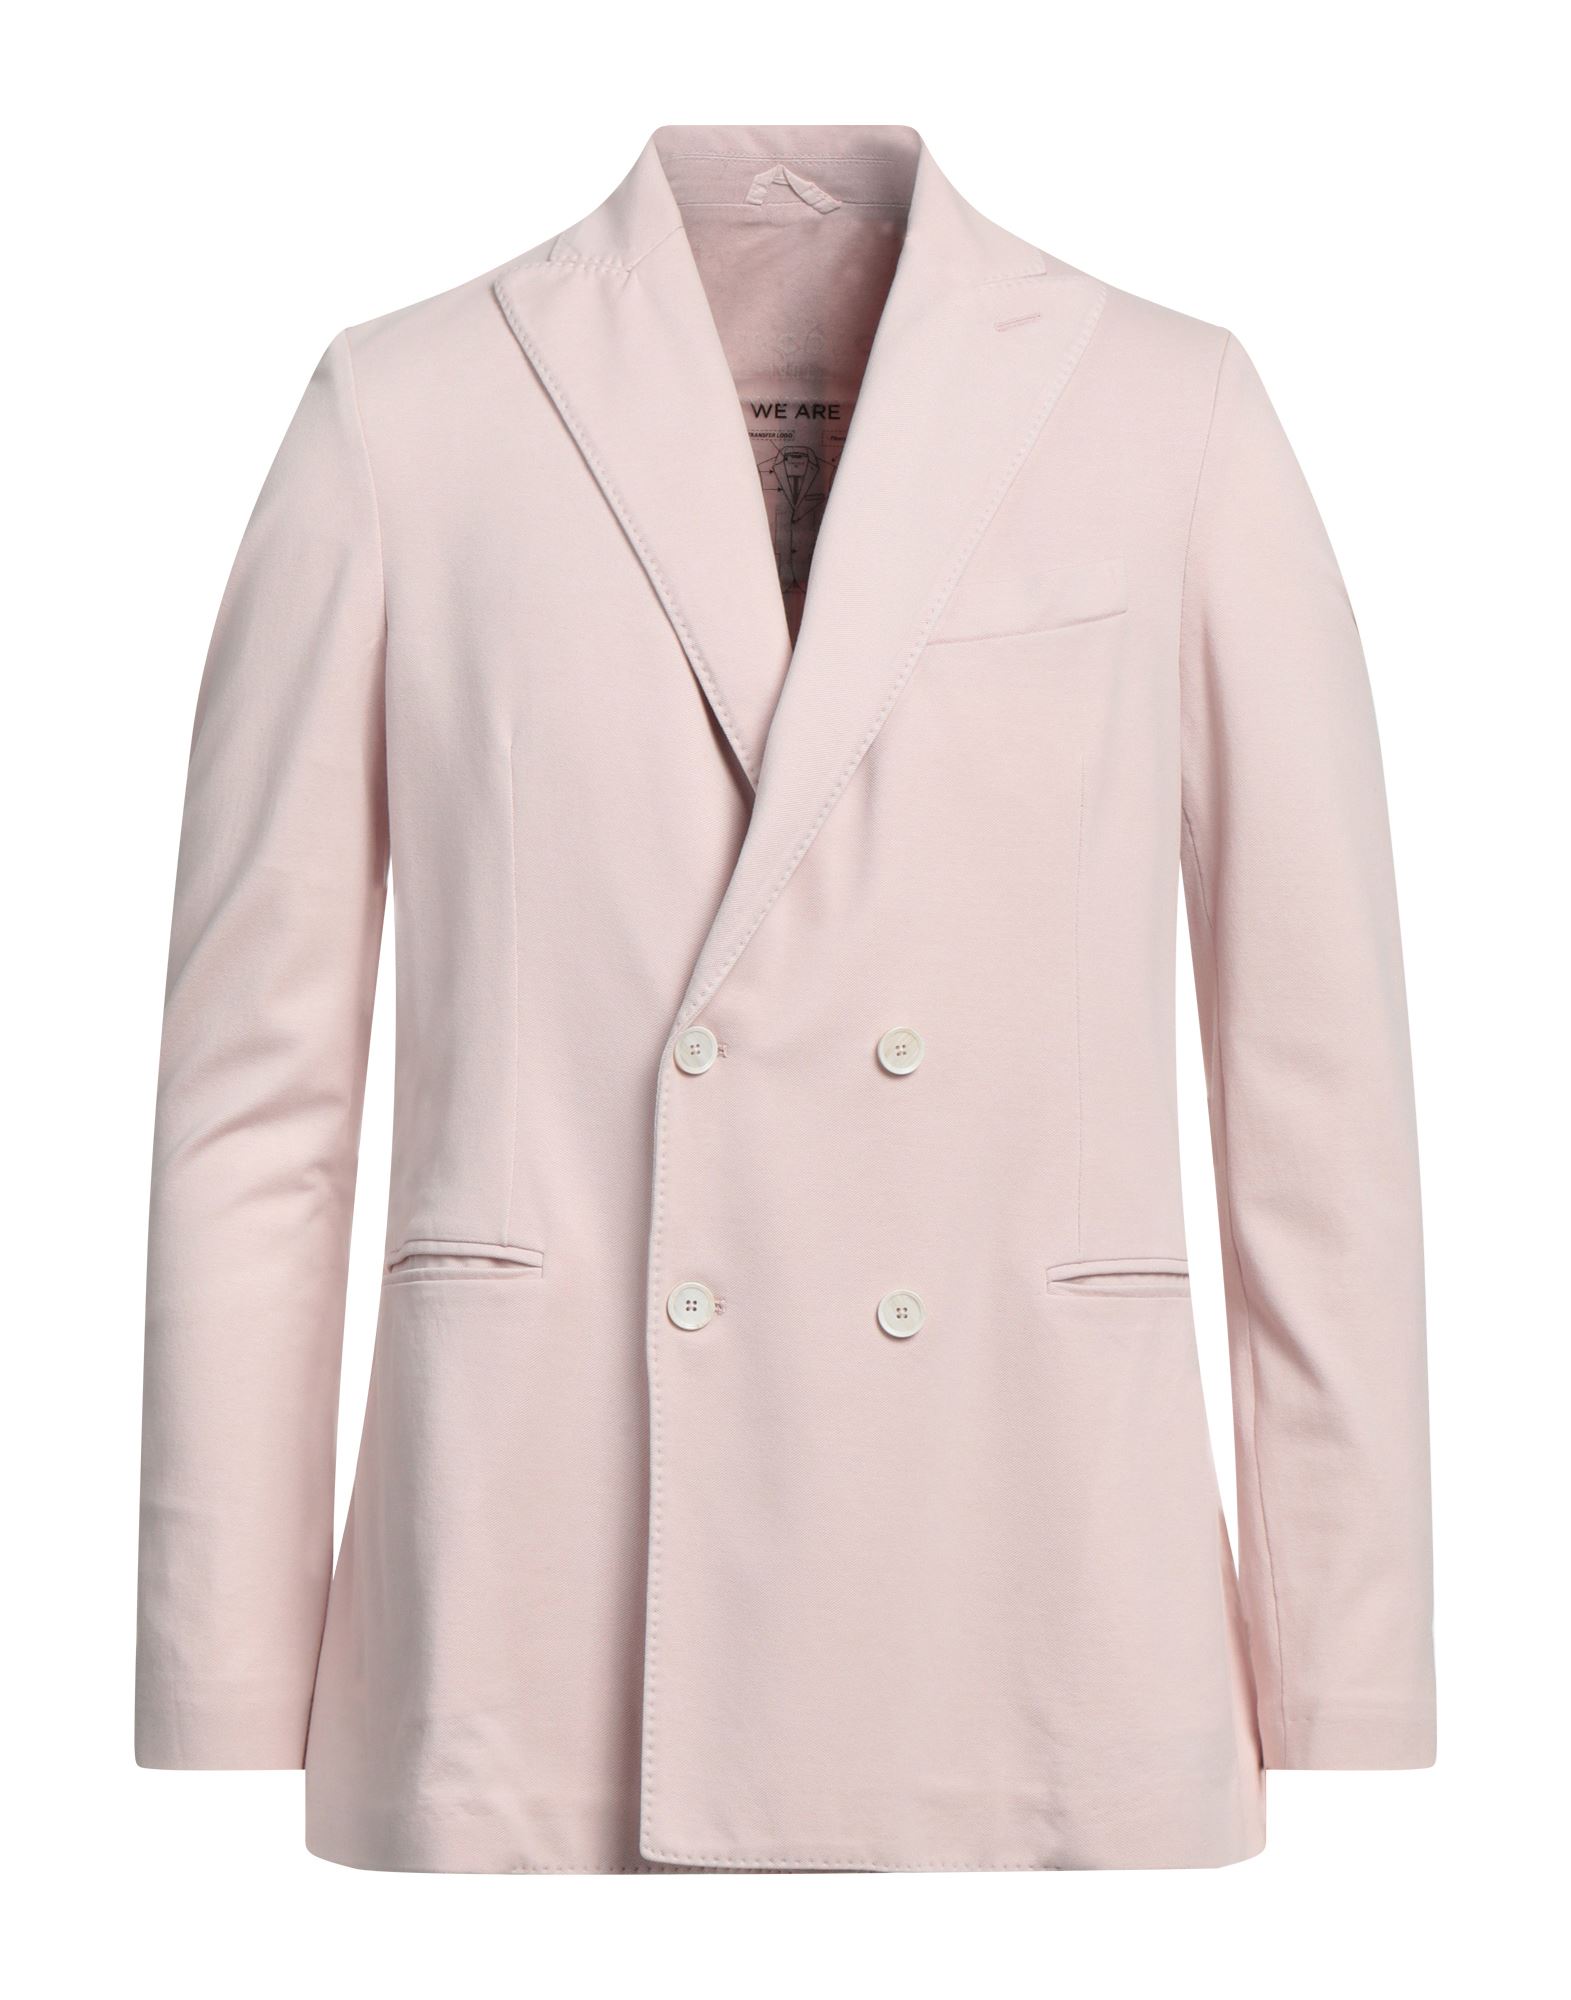 Circolo 1901 Suit Jackets In Pink